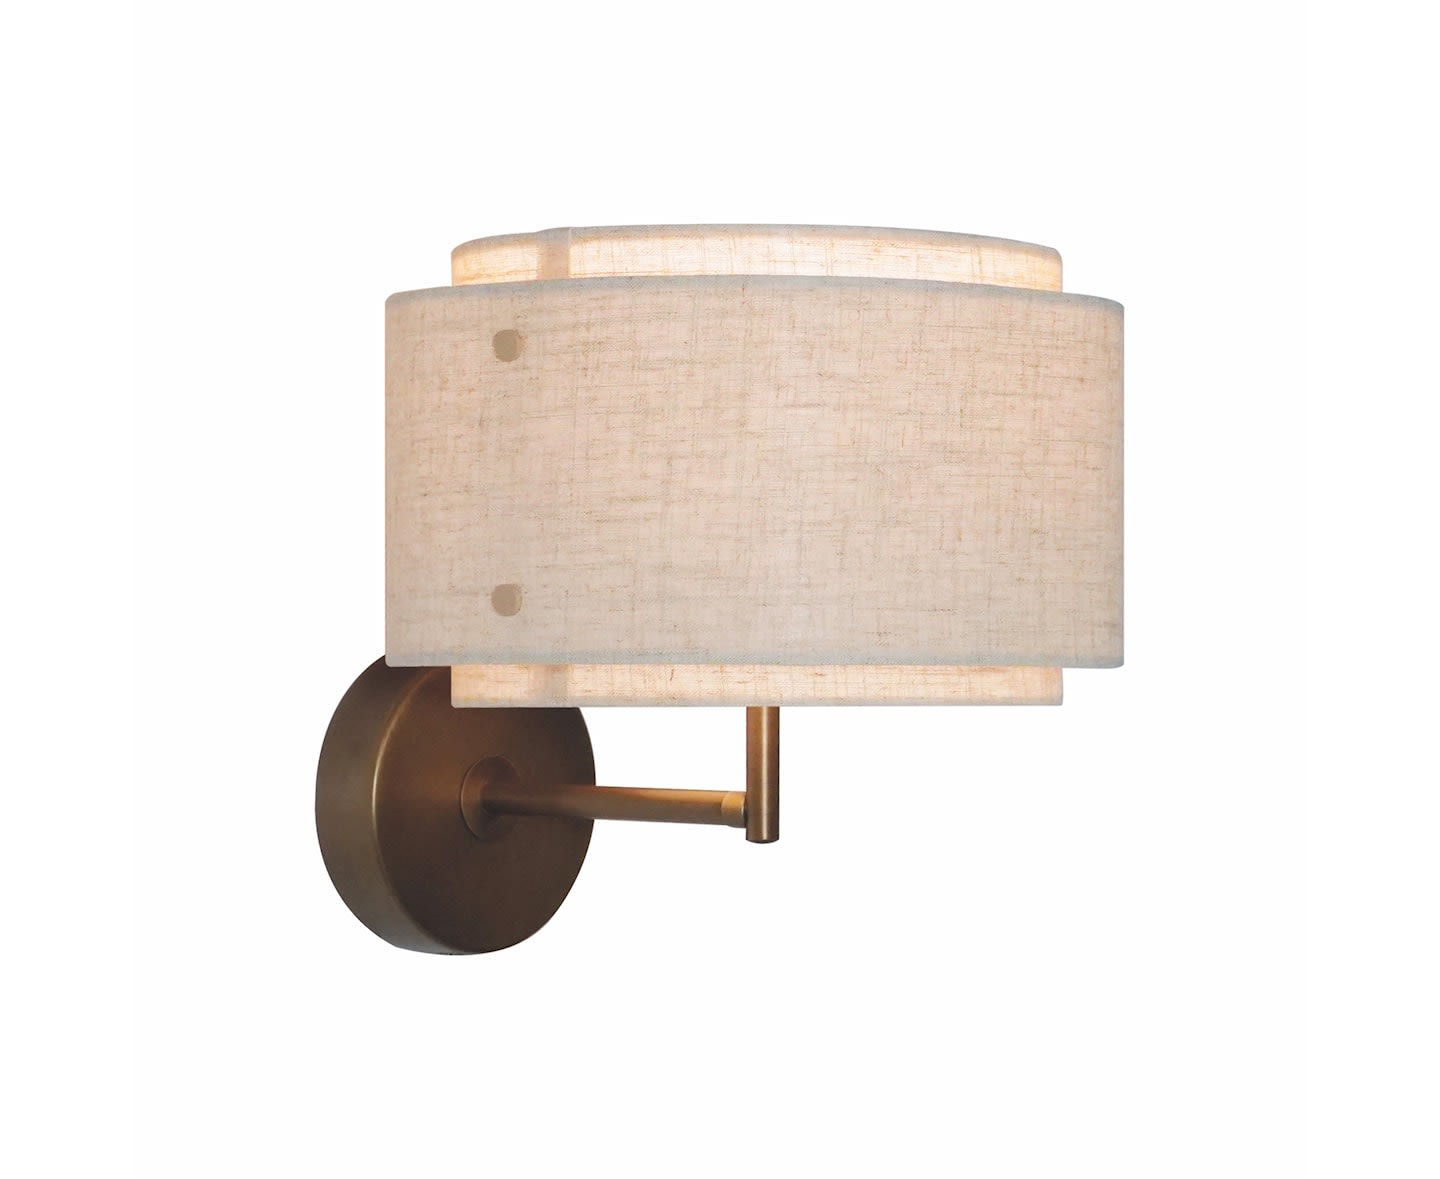 Design For The People Takai Vägglampa Beige